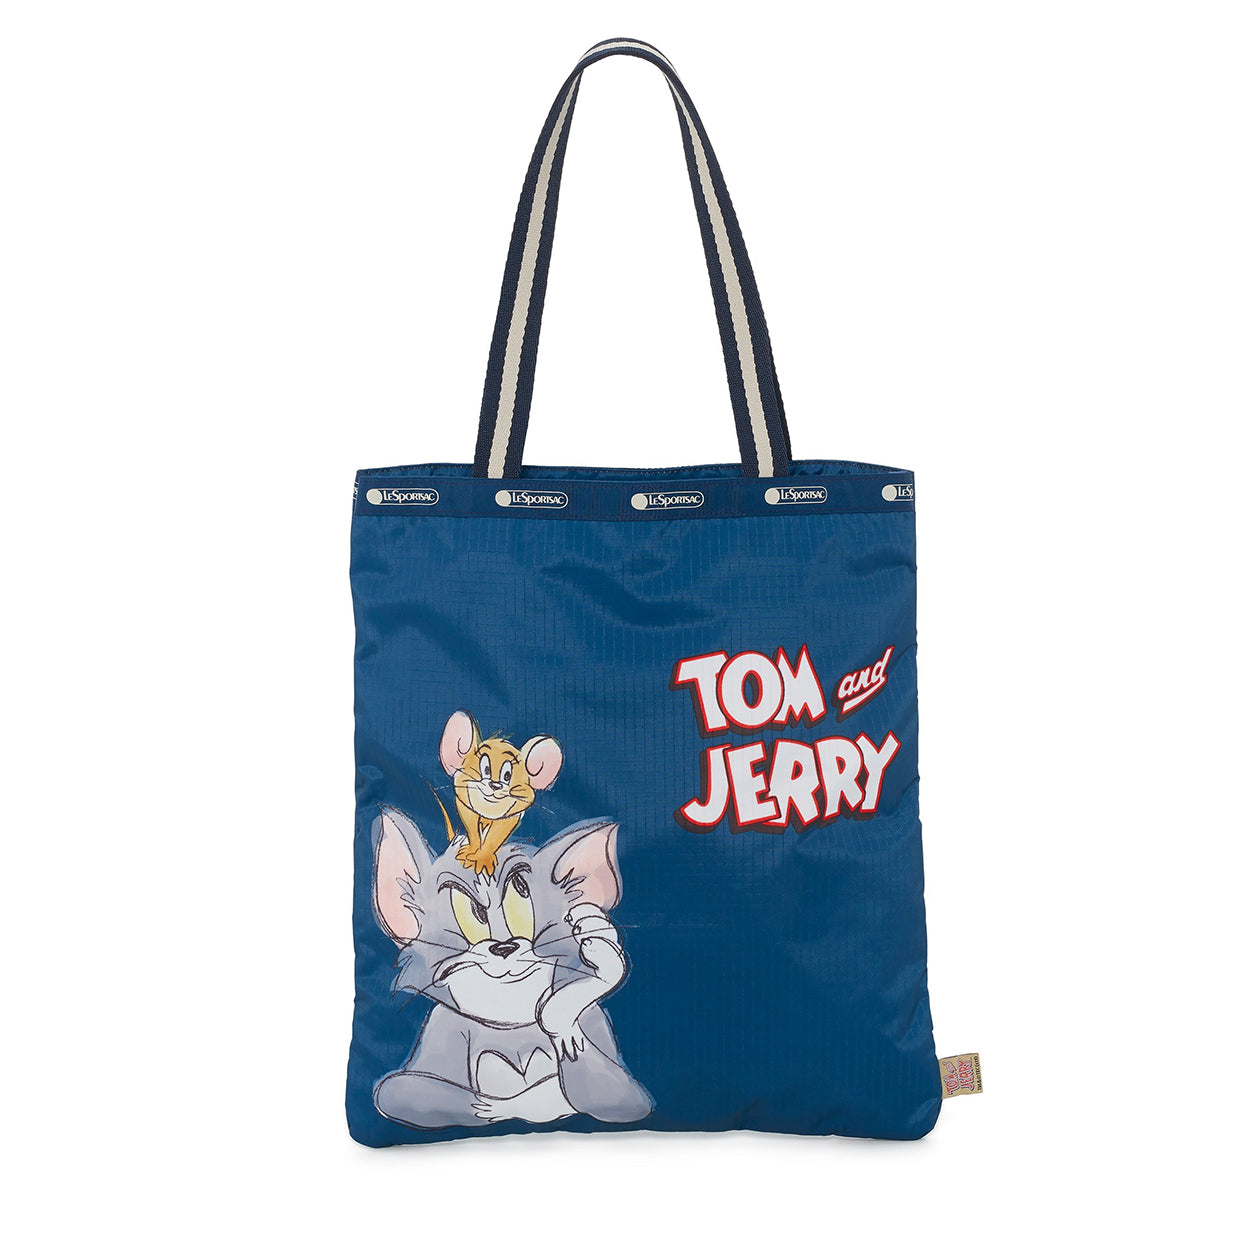 LeSportsac - Official Page: Tom and Jerry x LeSportsac is Now Available ...